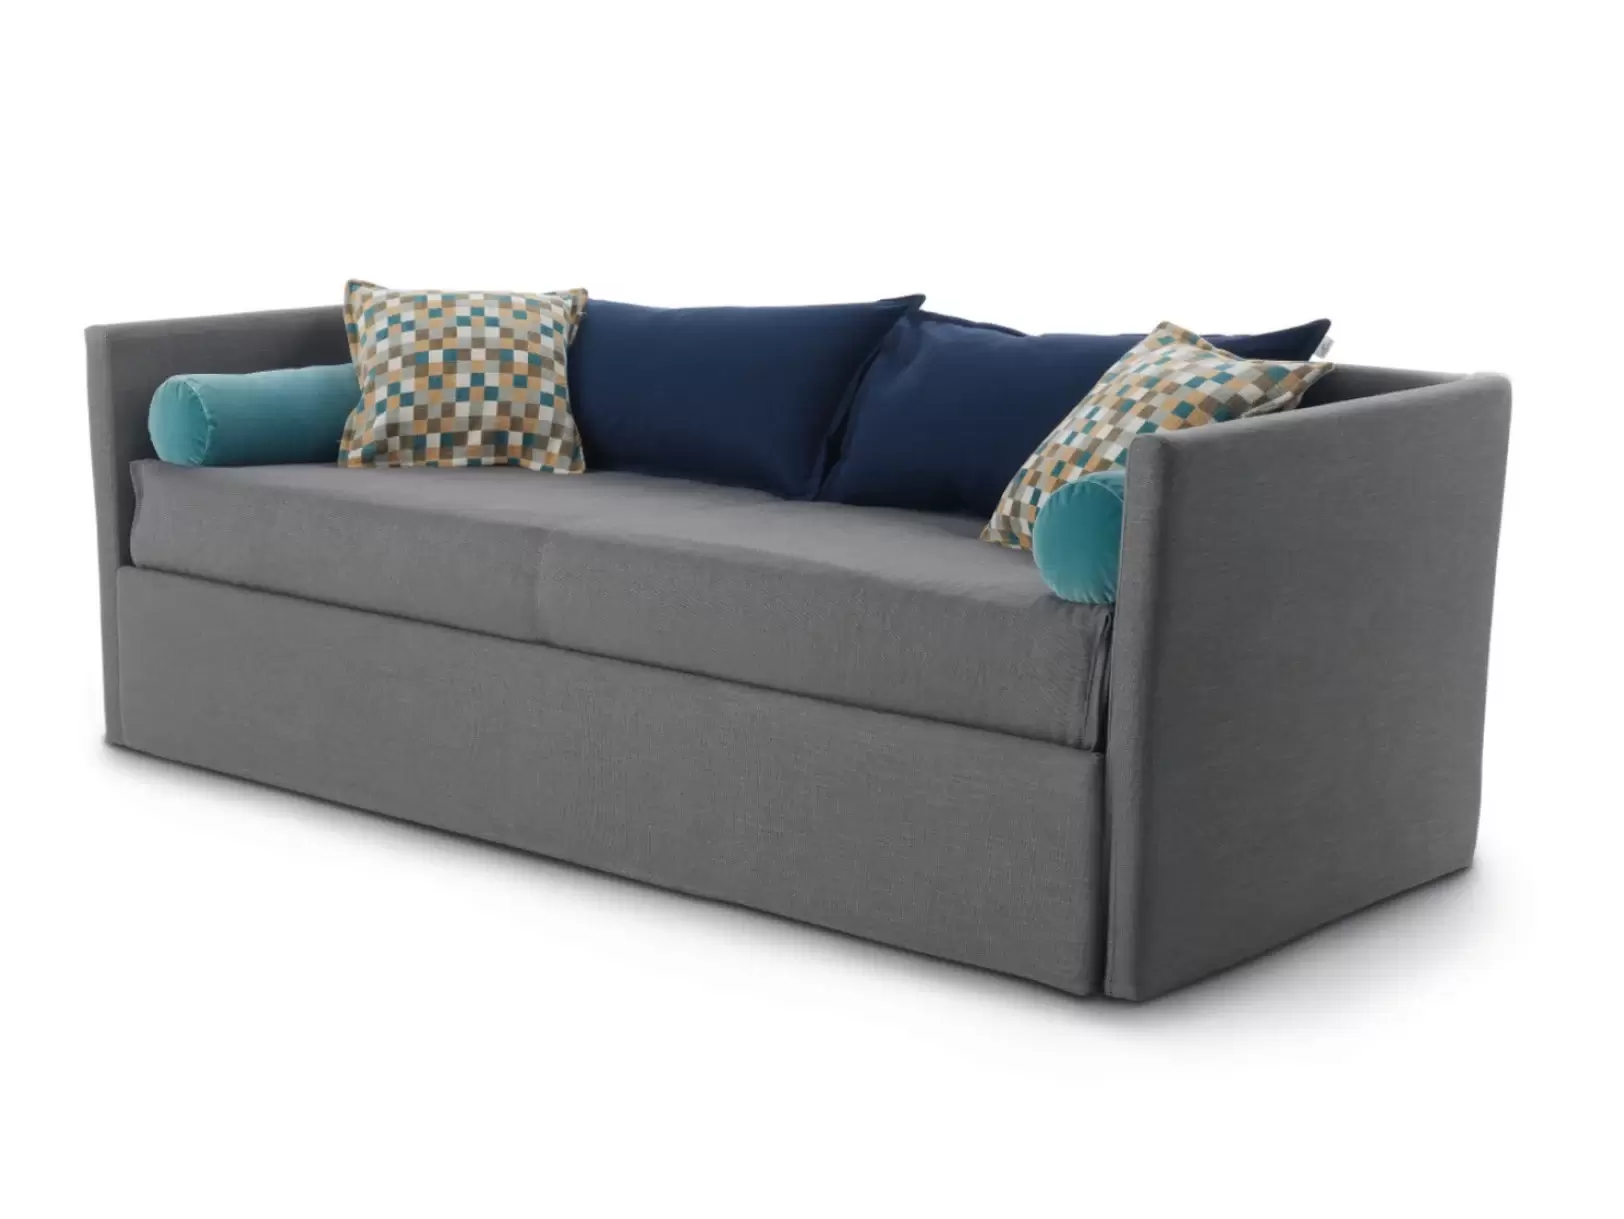 GABRIEL DUO ISOLOTTO 2 SEATER FABRIC SOFA BED WITH REMOVABLE COVER